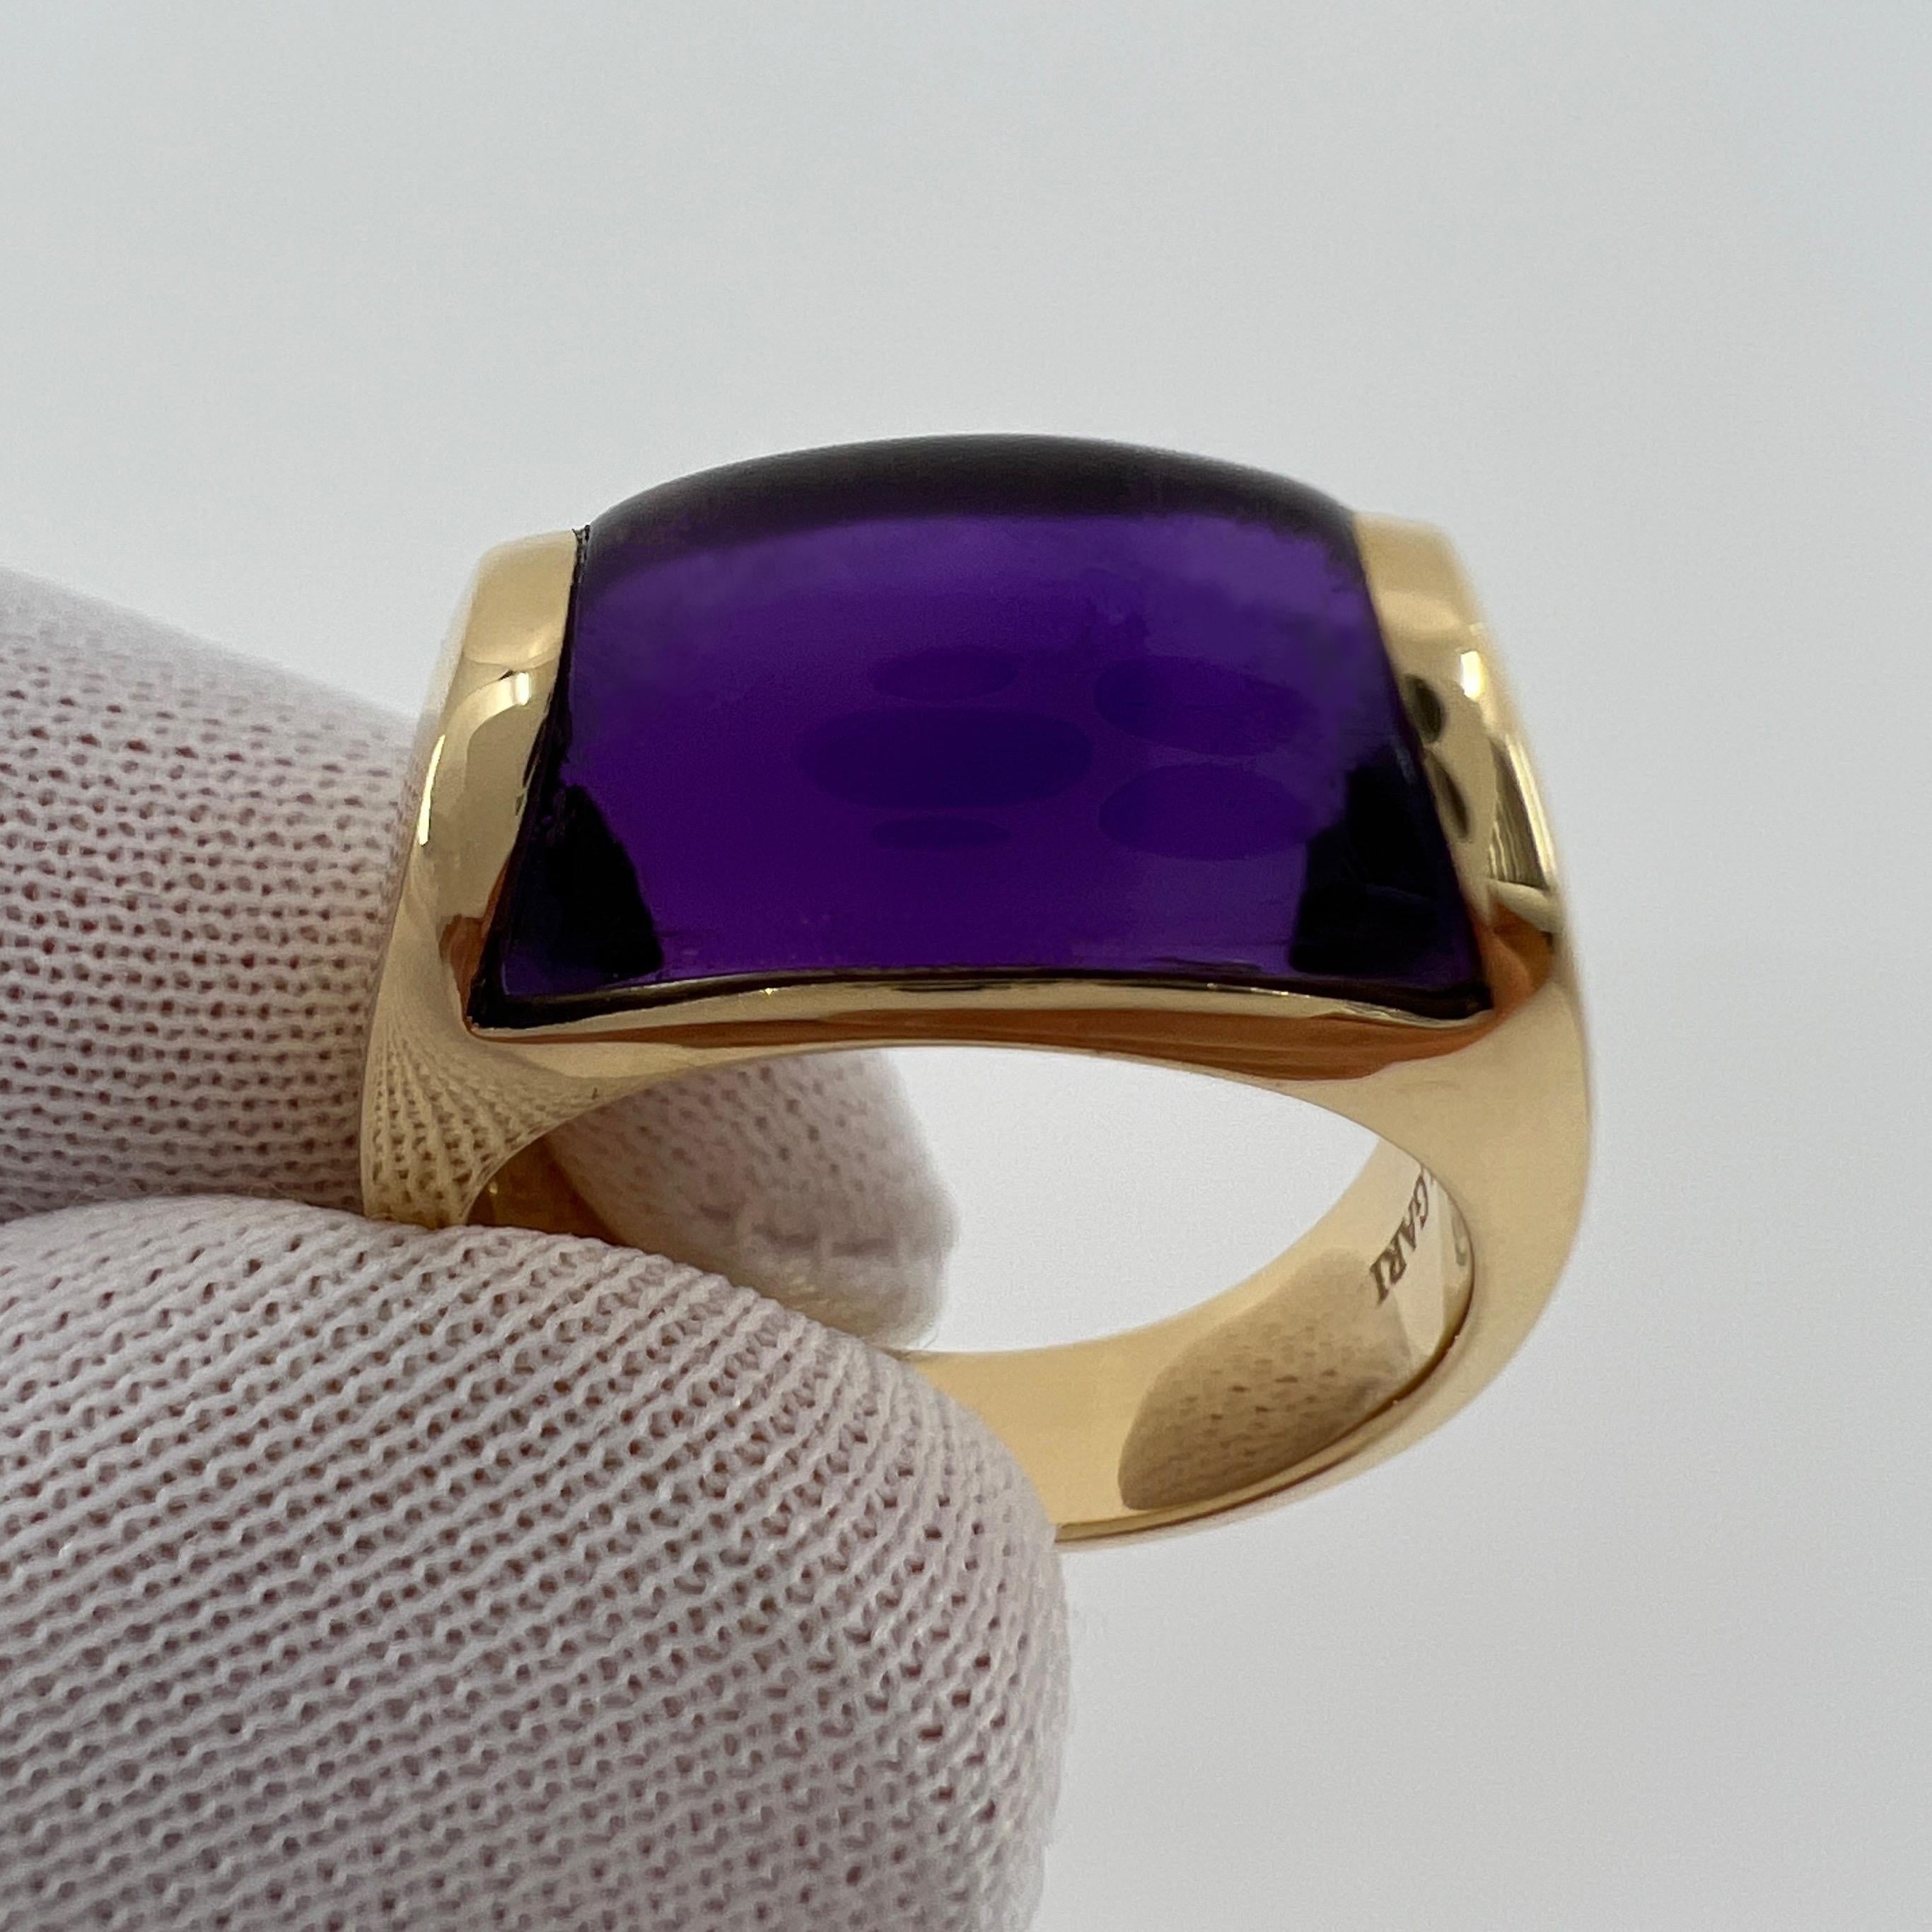 Rare Bvlgari Deep Purple Amethyst Tronchetto 18k Yellow Gold Ring.

Beautiful domed purple amethyst set in a fine 18k yellow gold tension set ring.

In excellent condition, has been professionally polished and cleaned.

Ring size: UK J1/2 - US 5 -